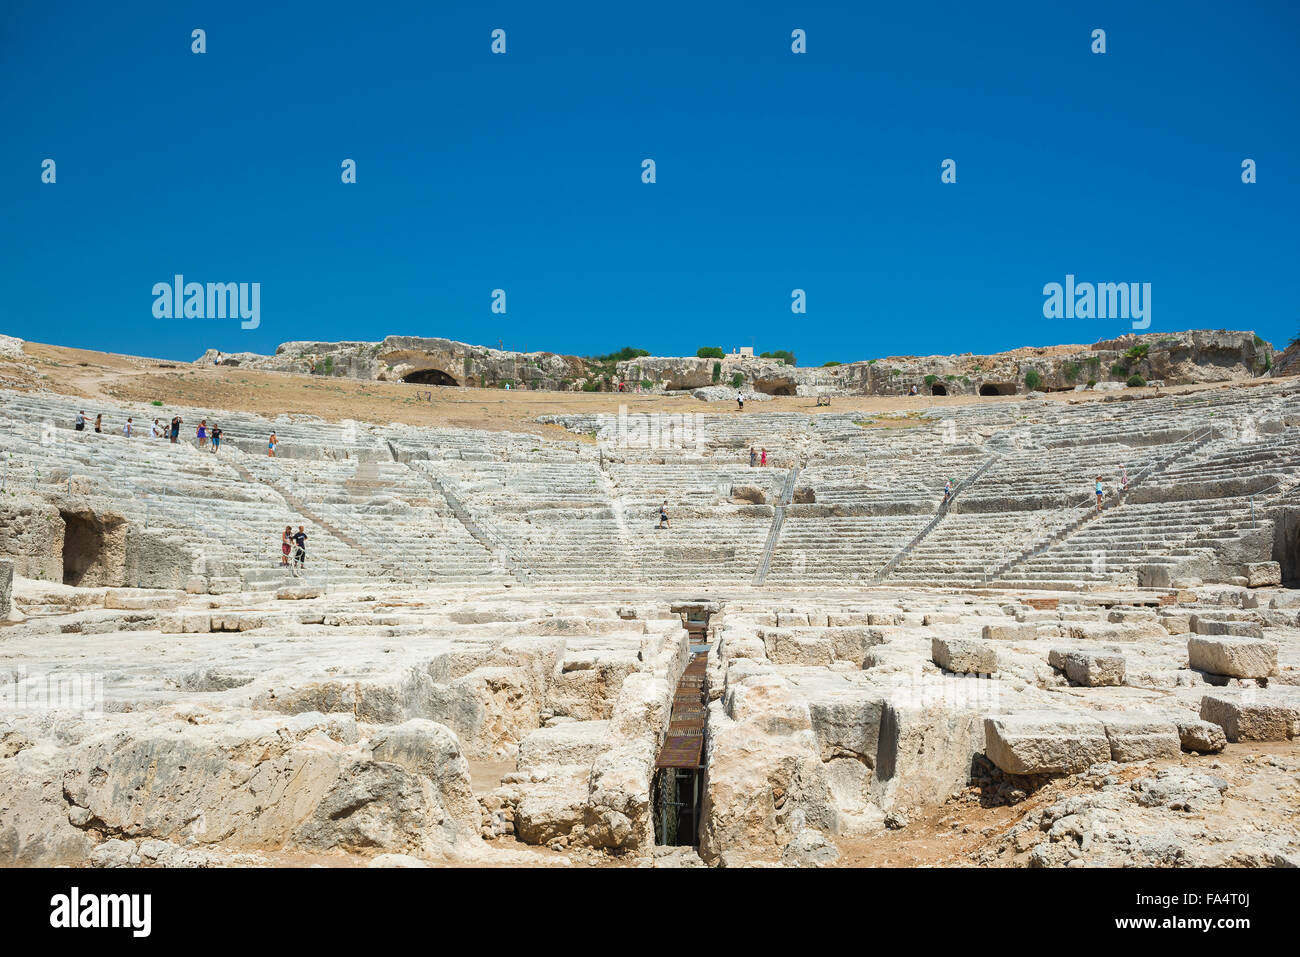 Greek theatre Syracuse Sicily, view of the auditorium (cavea) of the ancient Greek theater in the Archaeological Park (Parco Archeologico) Sicily. Stock Photo